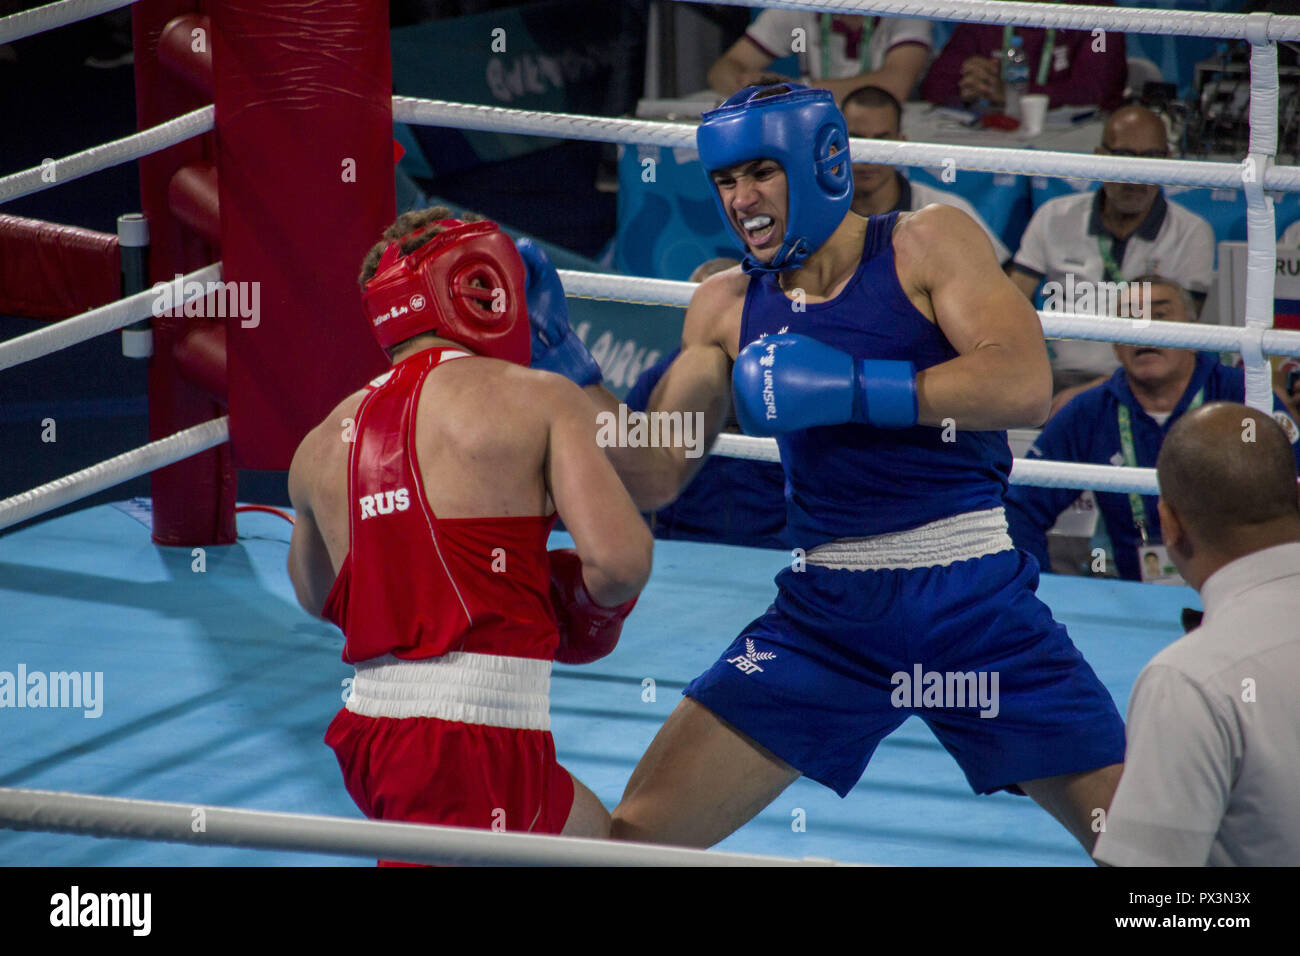 October 18, 2018 - Buenos Aires, Buenos Aires, Argentina - The British boxer  Itauma Karol won the gold medal of the Men's Lightweight Weights (81 kg),  in the Youth Olympic Games, Buenos